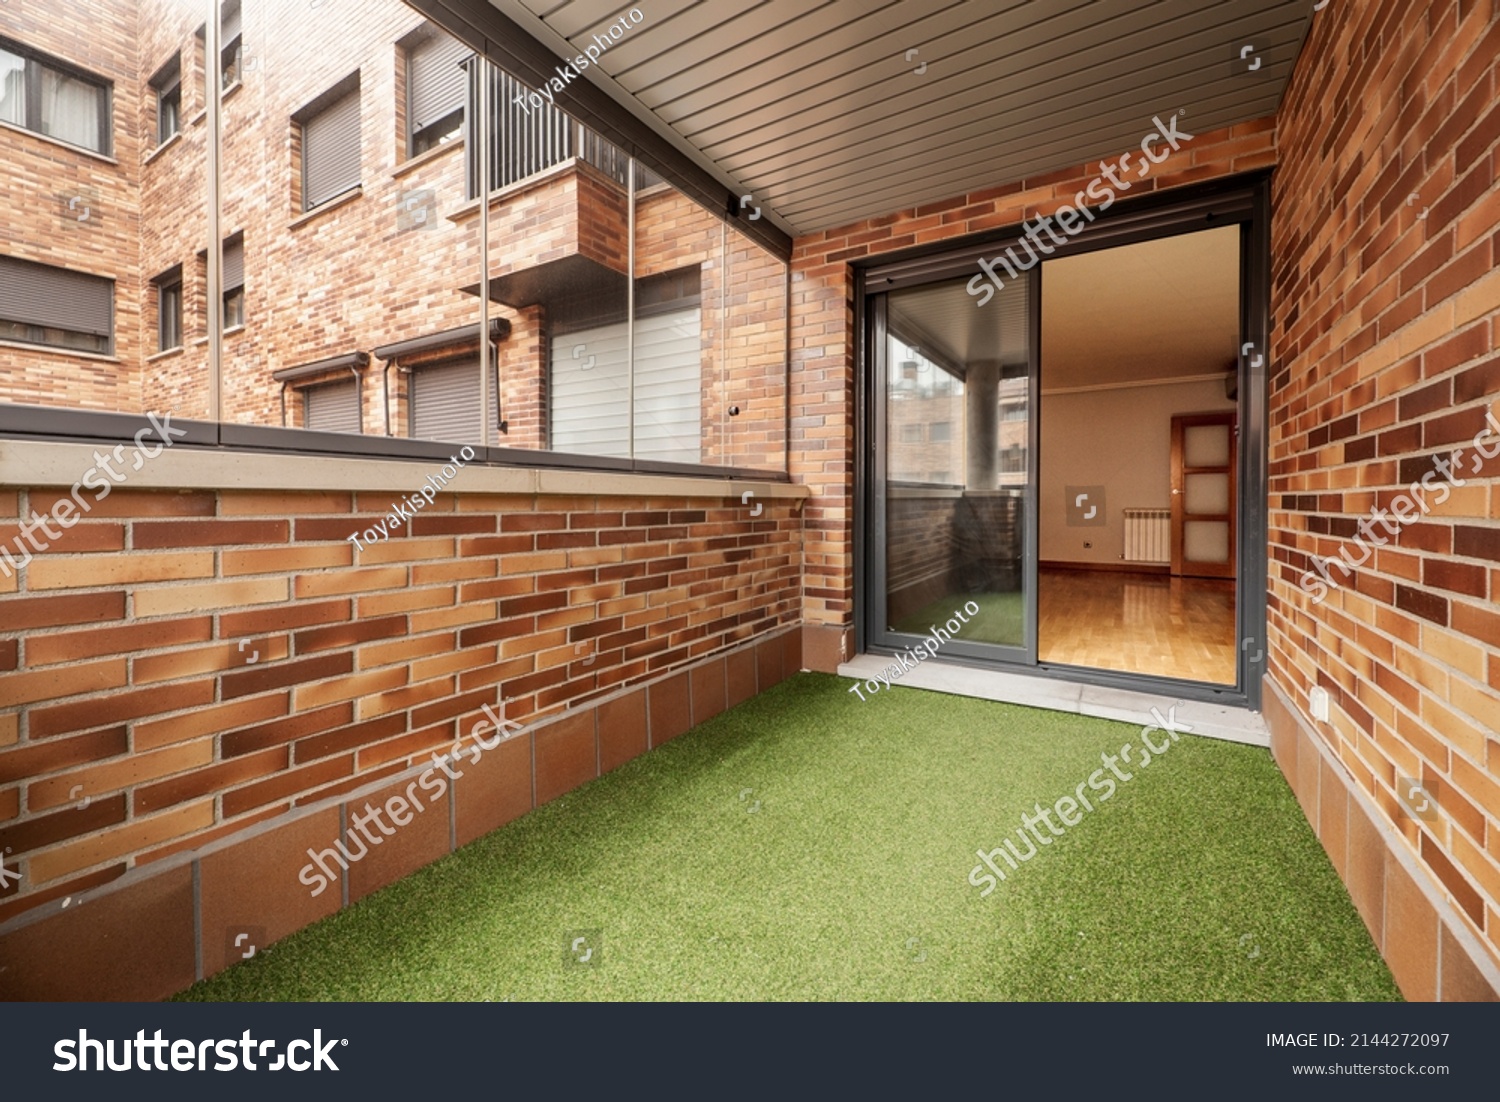 Enclosed terrace with glass and metal, brown bricks and green artificial grass floor in urban residential housing #2144272097